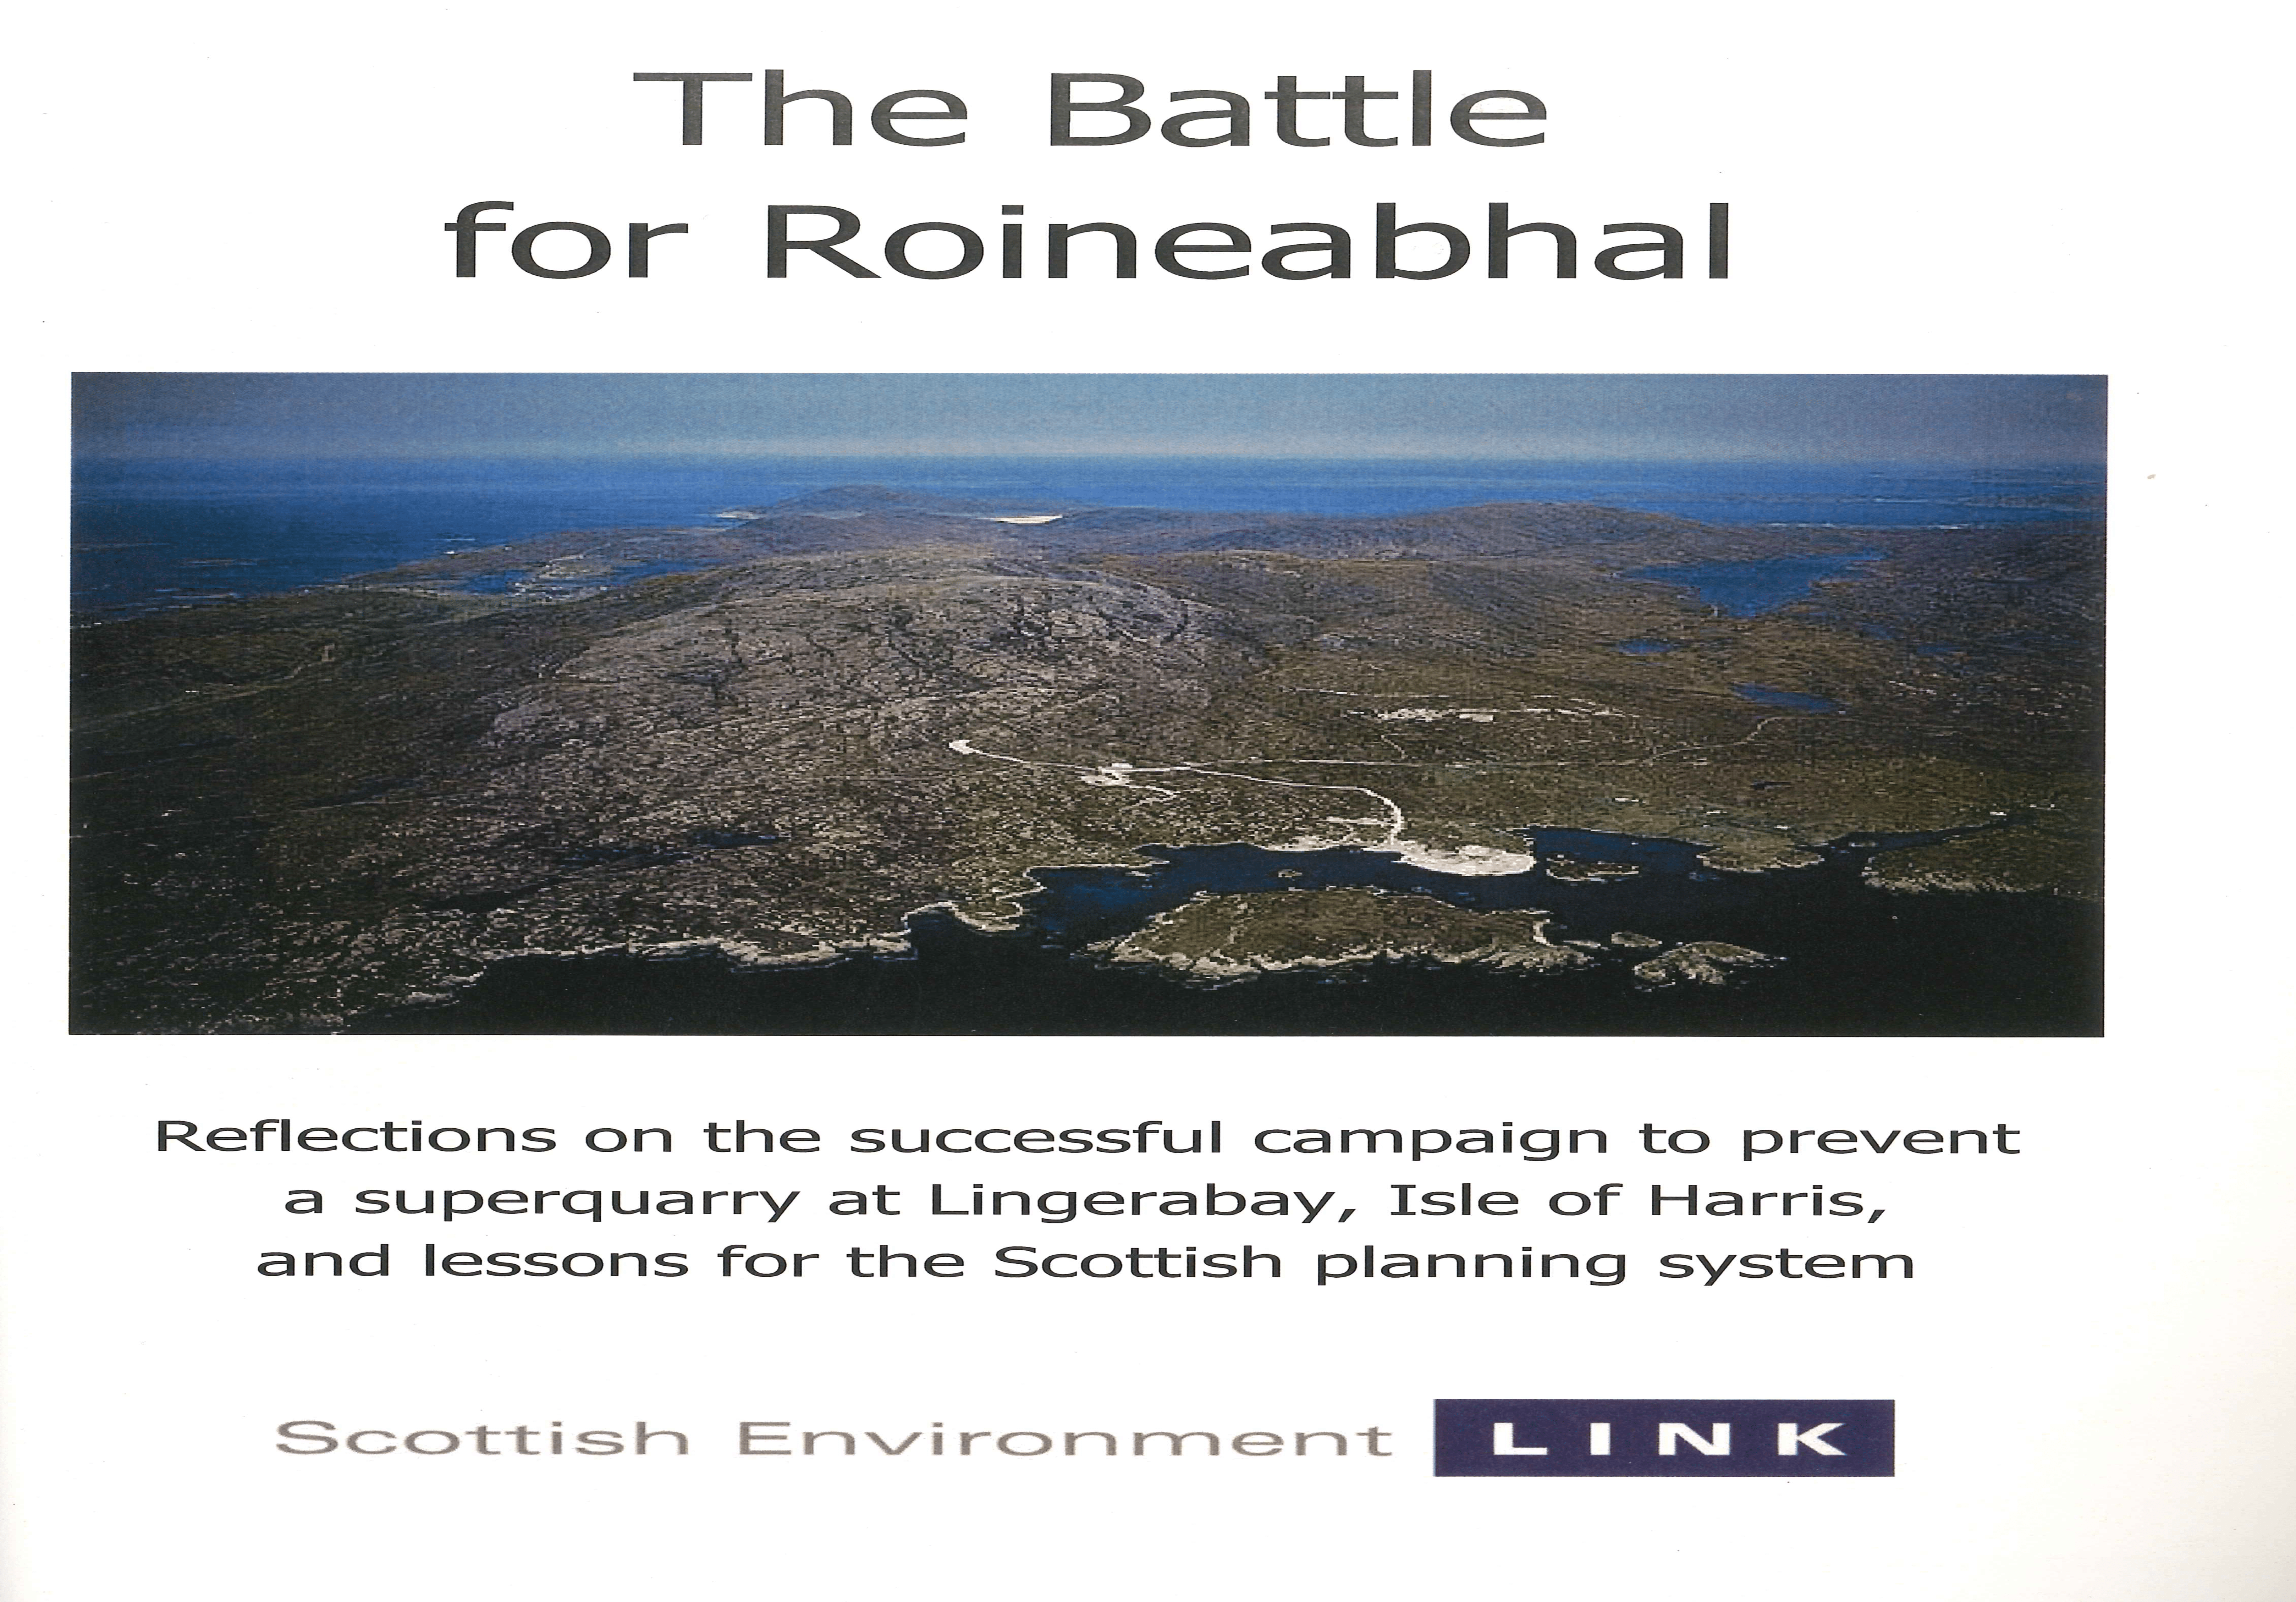 A cover of a document about Roineabhal and the protective measures needed.